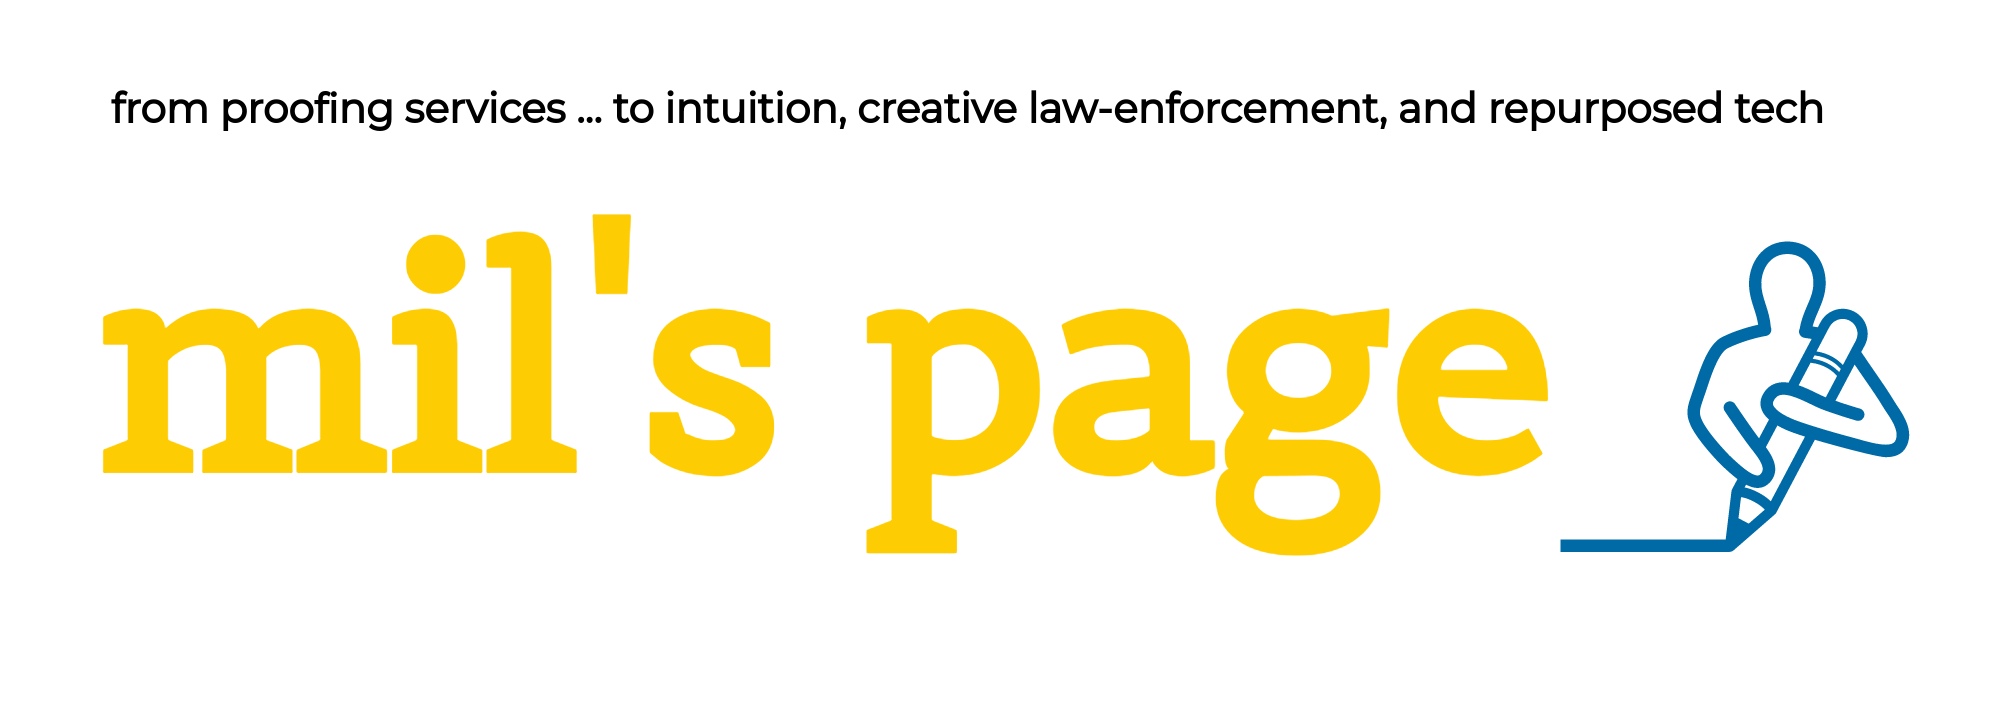 mils-page-logo.png